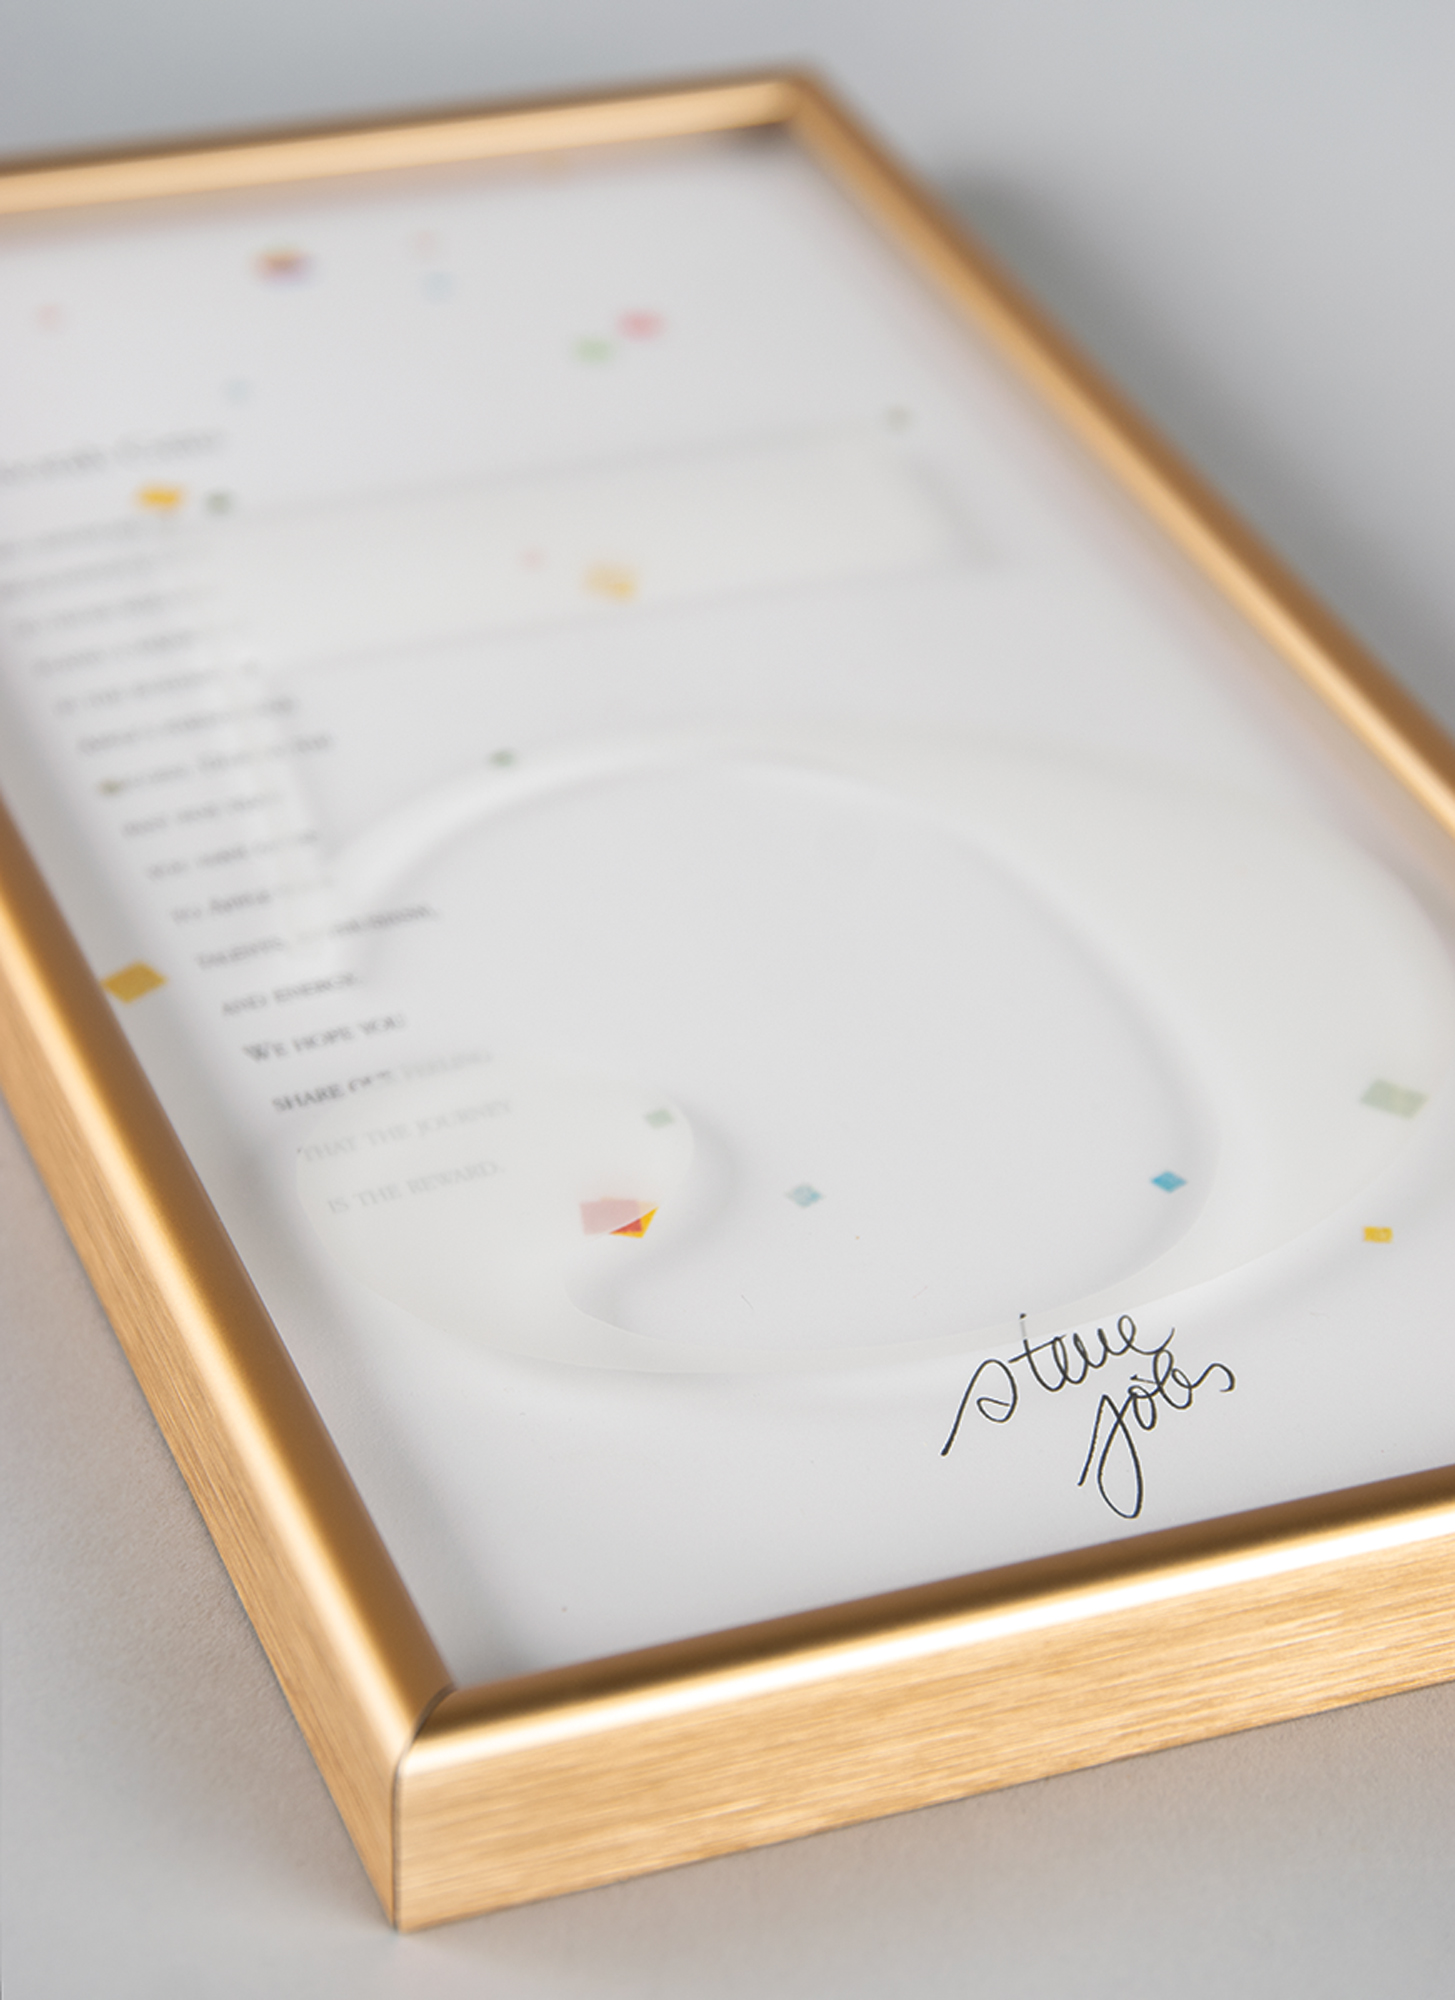 Lot #5081 Steve Jobs Signed Apple 5-Year Service Award for Employee who"played a major role in the building of Apple's phenomenal success" - Image 1